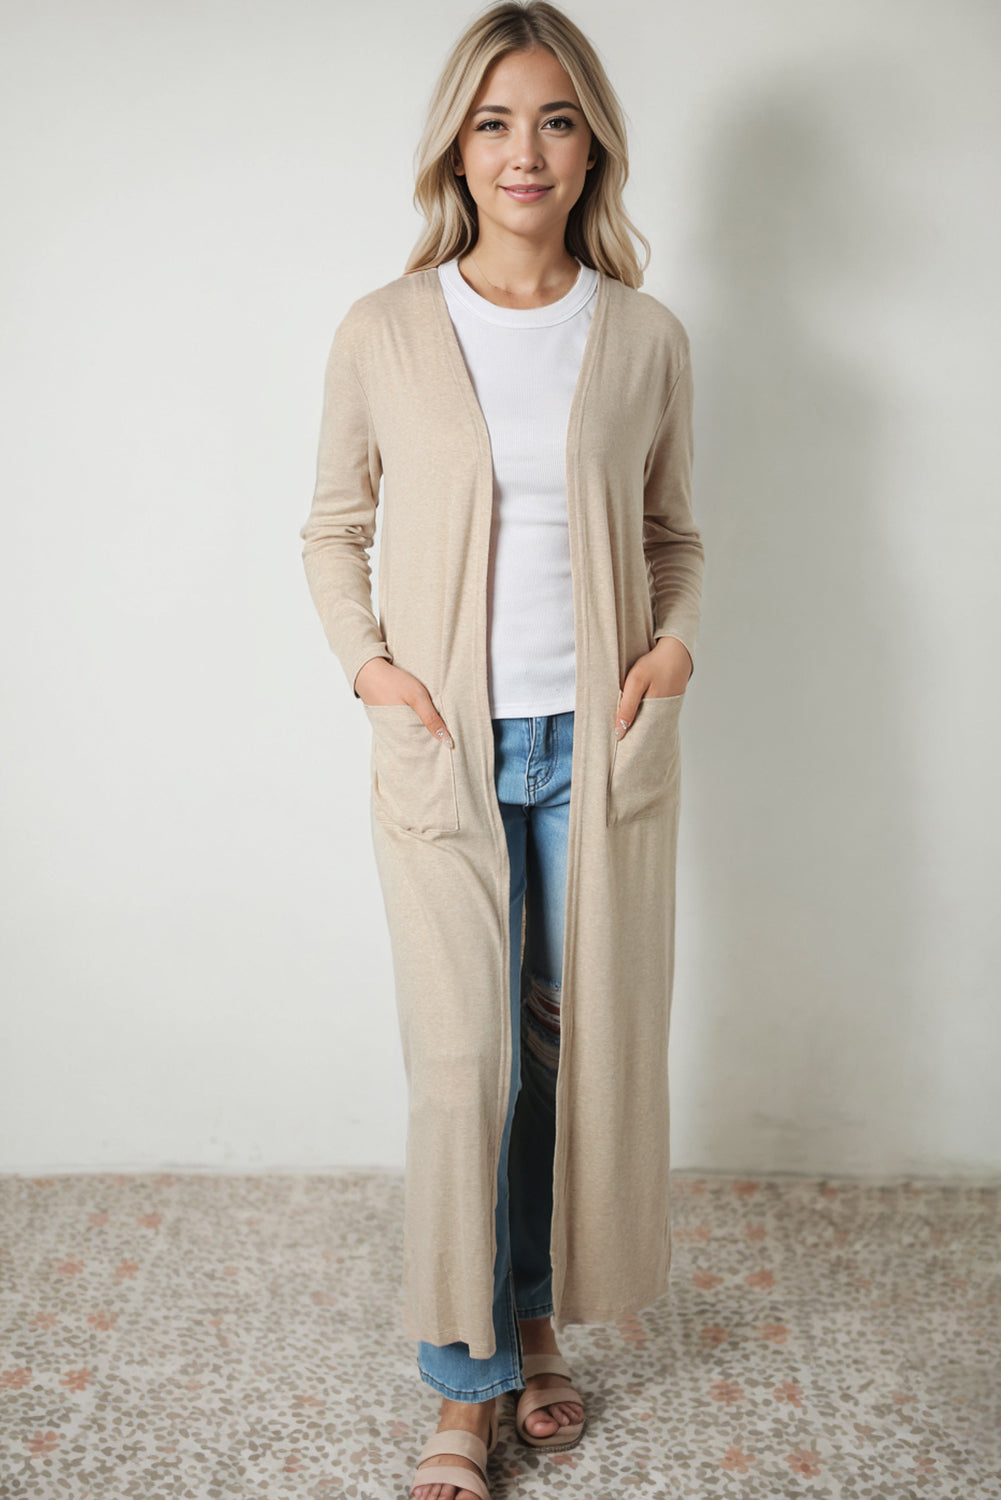 Long Sleeve Slit Cardigan with Pocket - Women’s Clothing & Accessories - Shirts & Tops - 6 - 2024